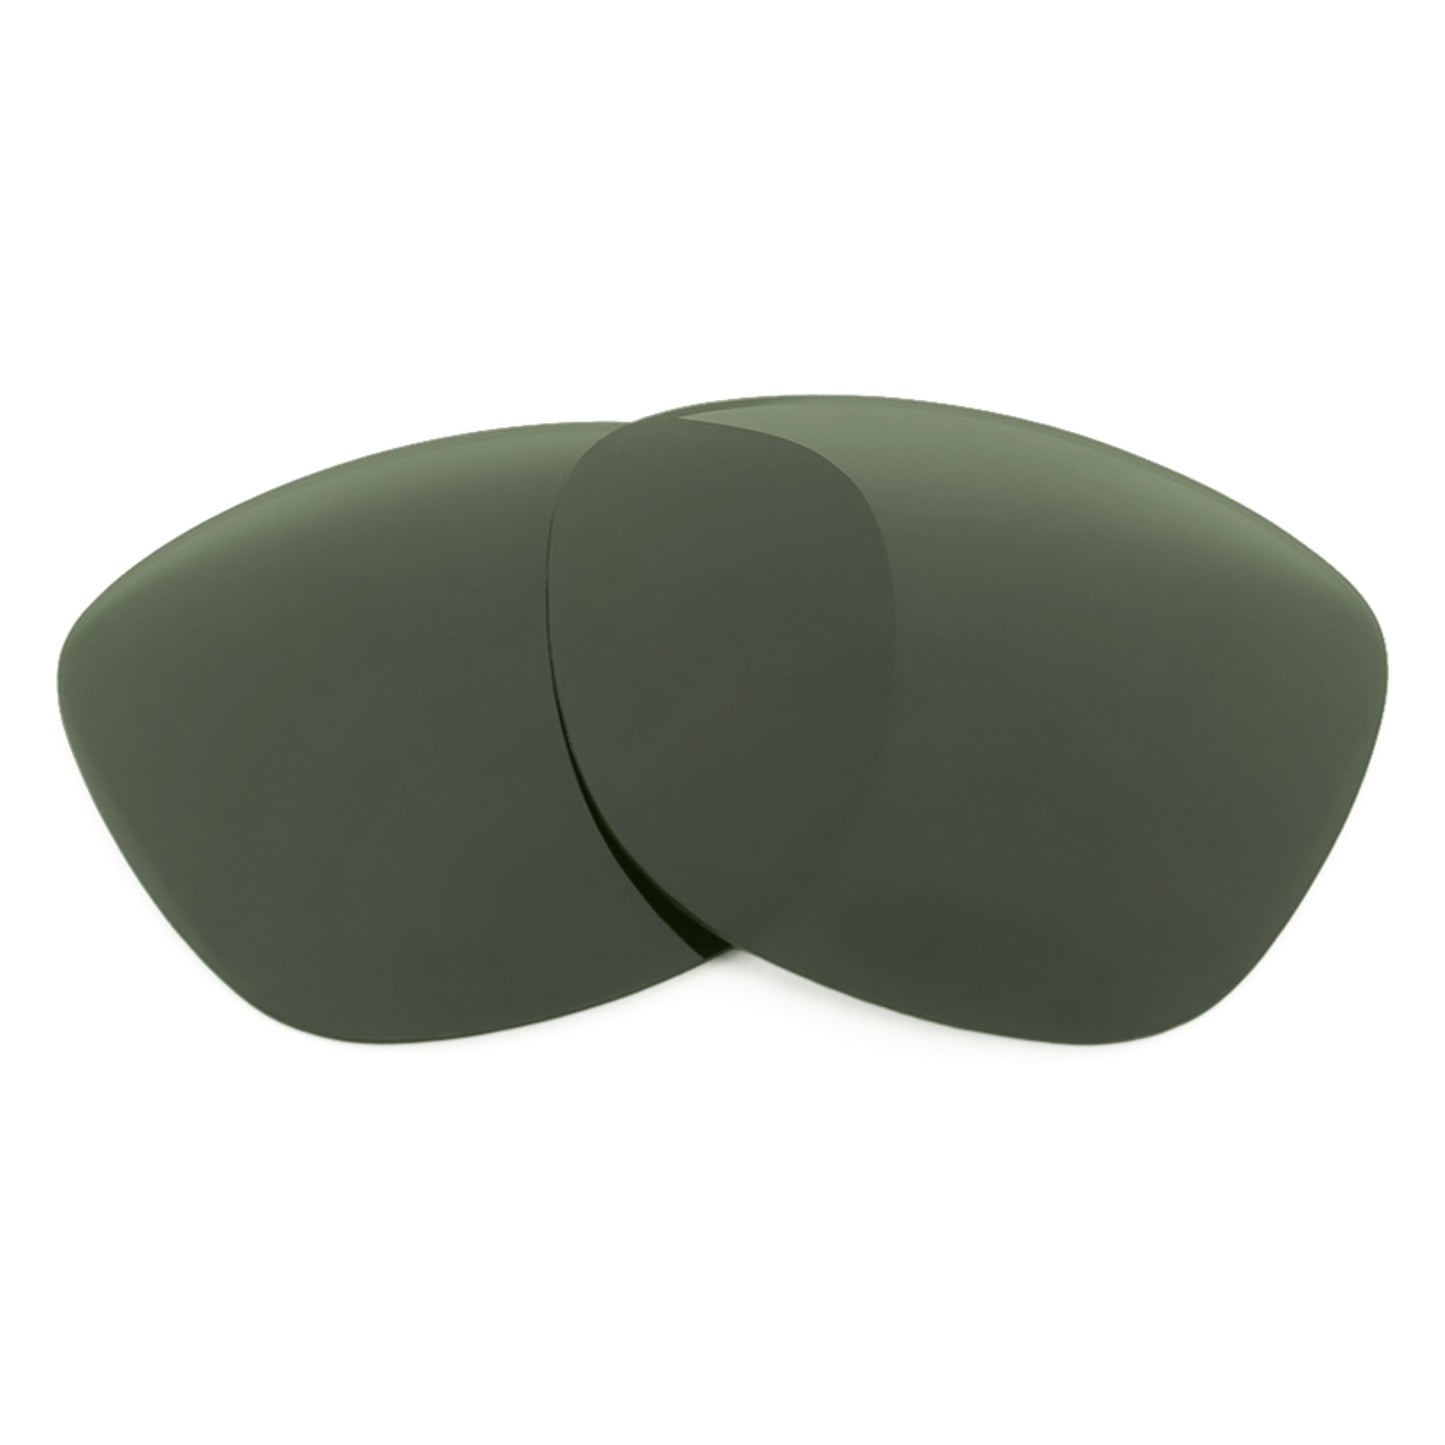 Revant replacement lenses for Ray-Ban Justin RB4165 51mm Non-Polarized Gray Green